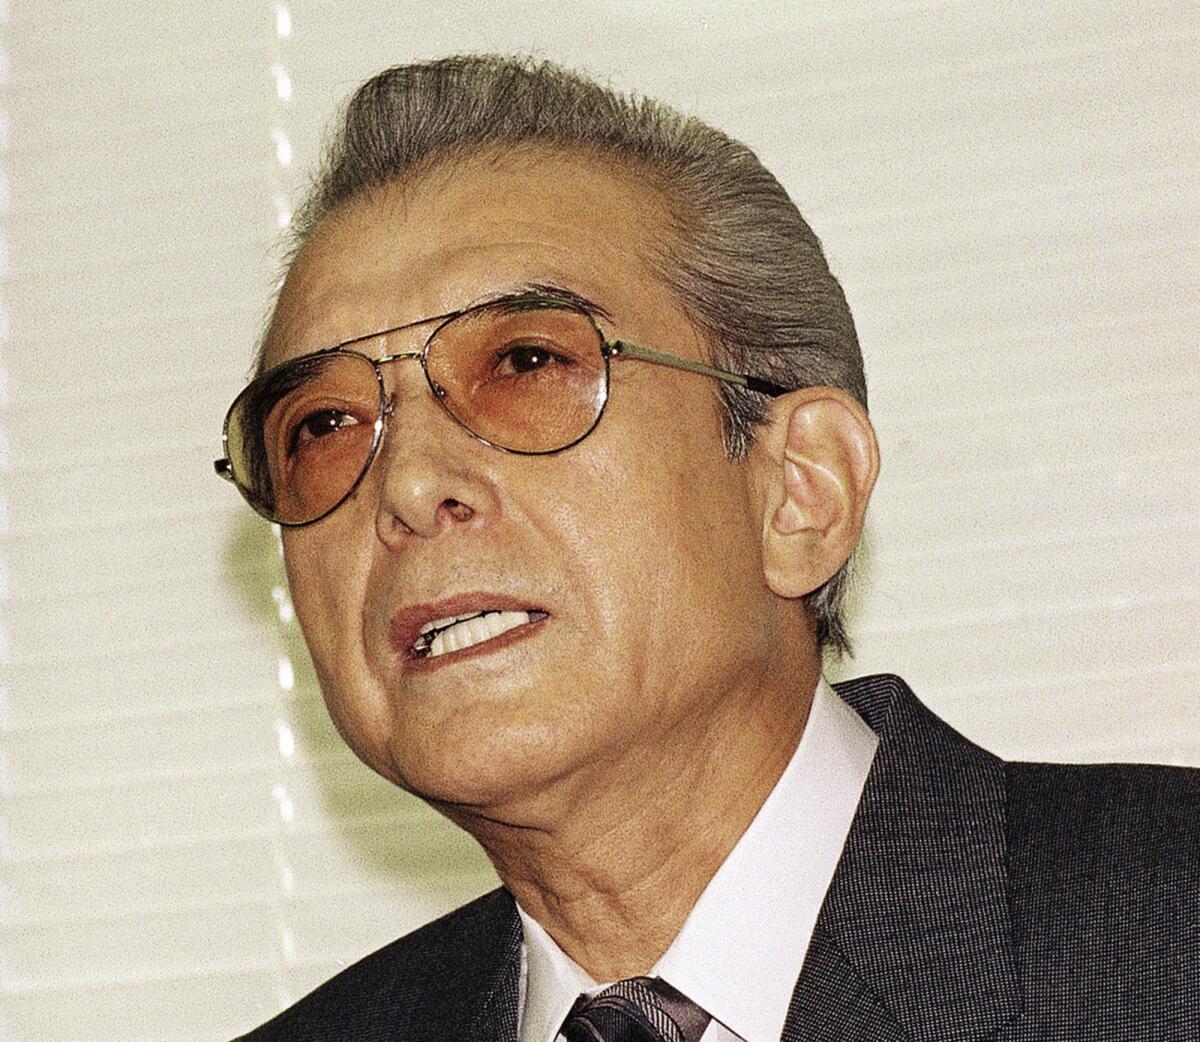 Hiroshi Yamauchi, who ran Nintendo for more than 50 years, died of pneumonia Thursday in Japan. He was 85.